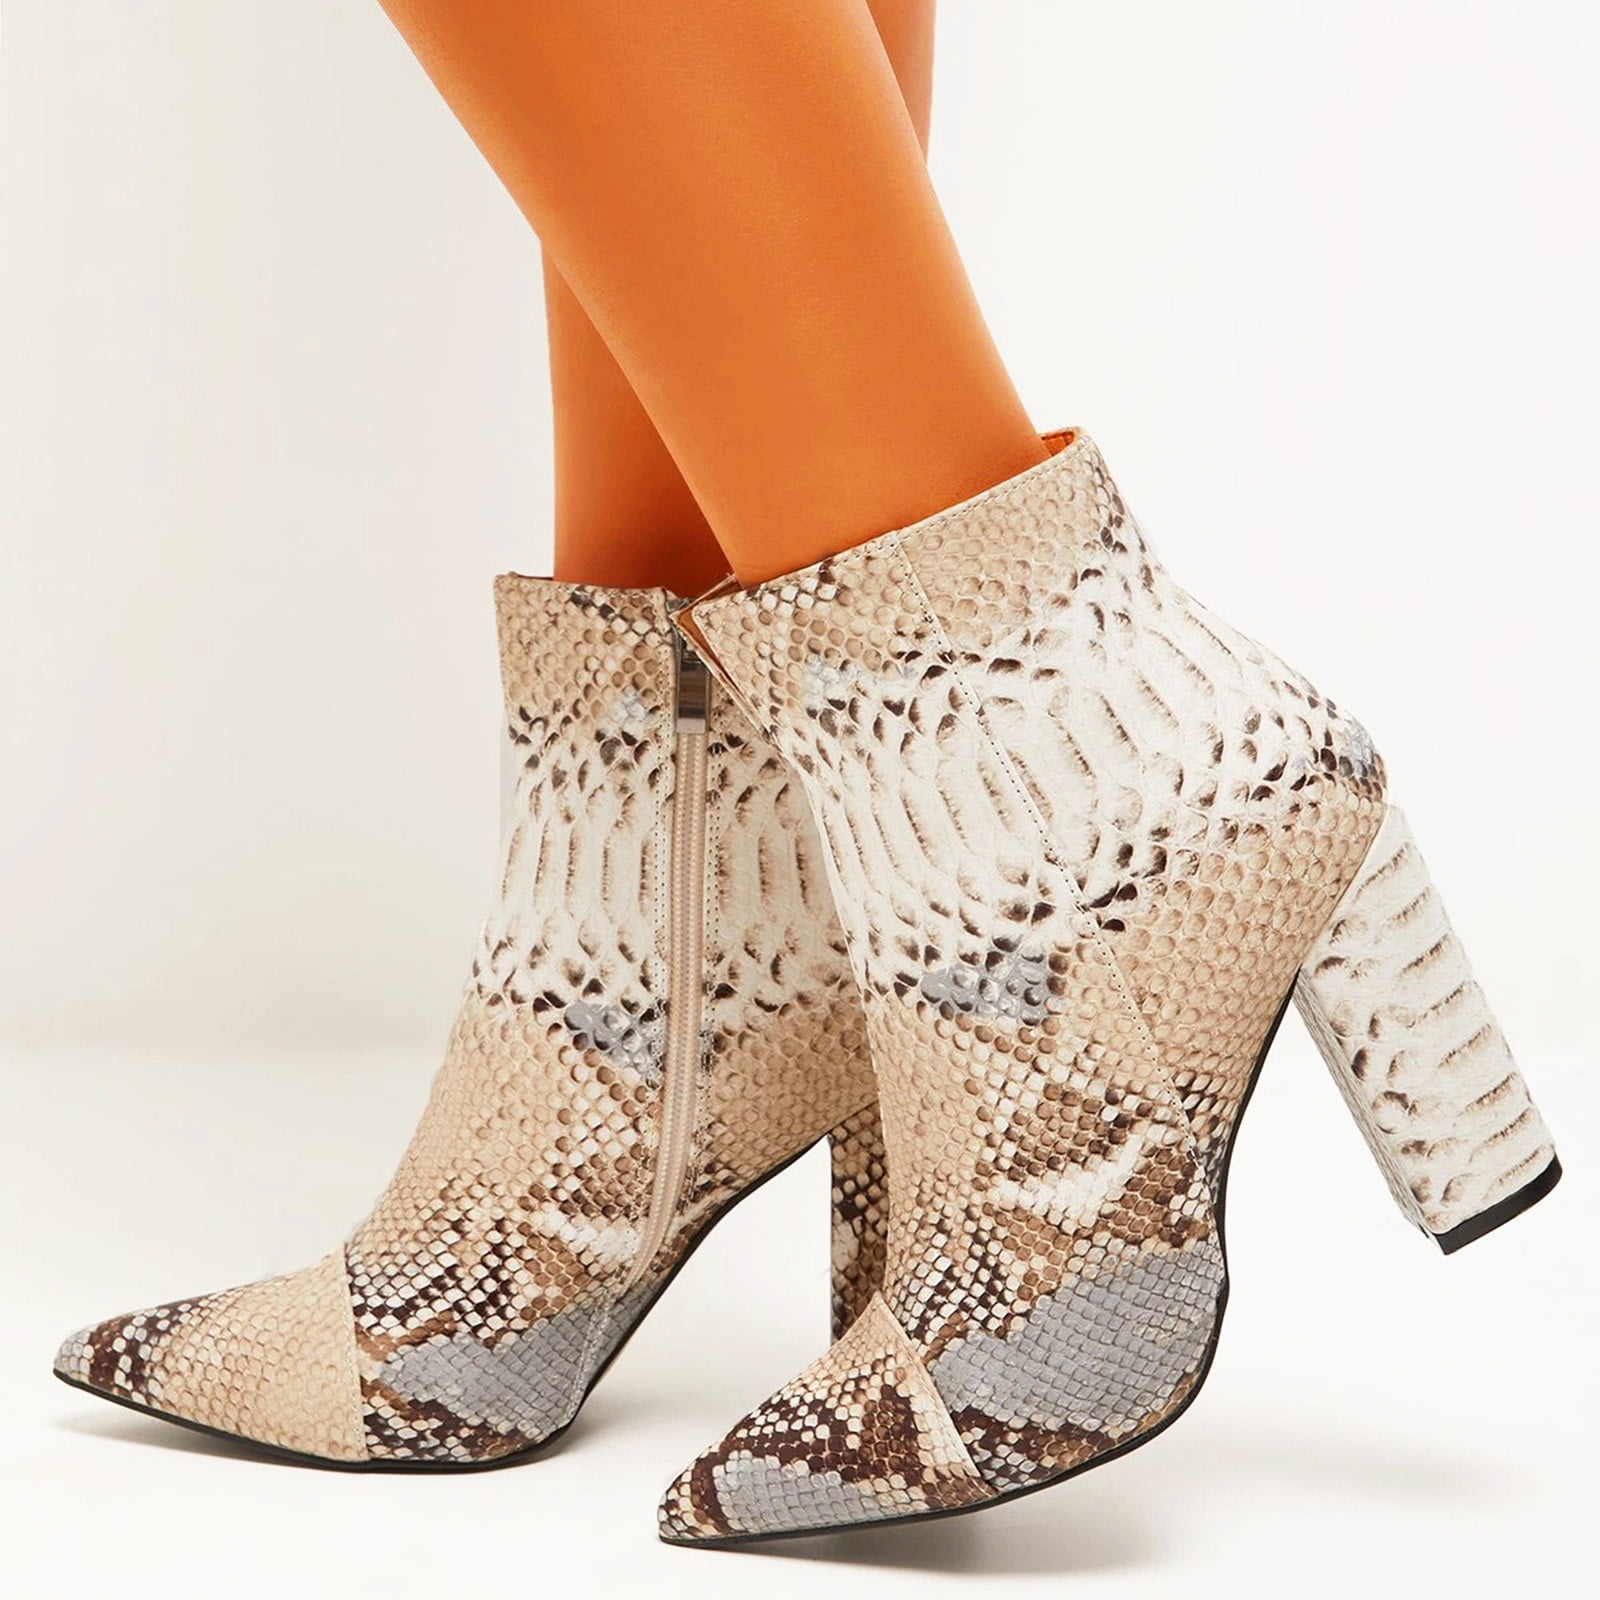 Women's Ankle Boots Snakeskin Block High Heels Platform Lace Up Round Toe Shoes